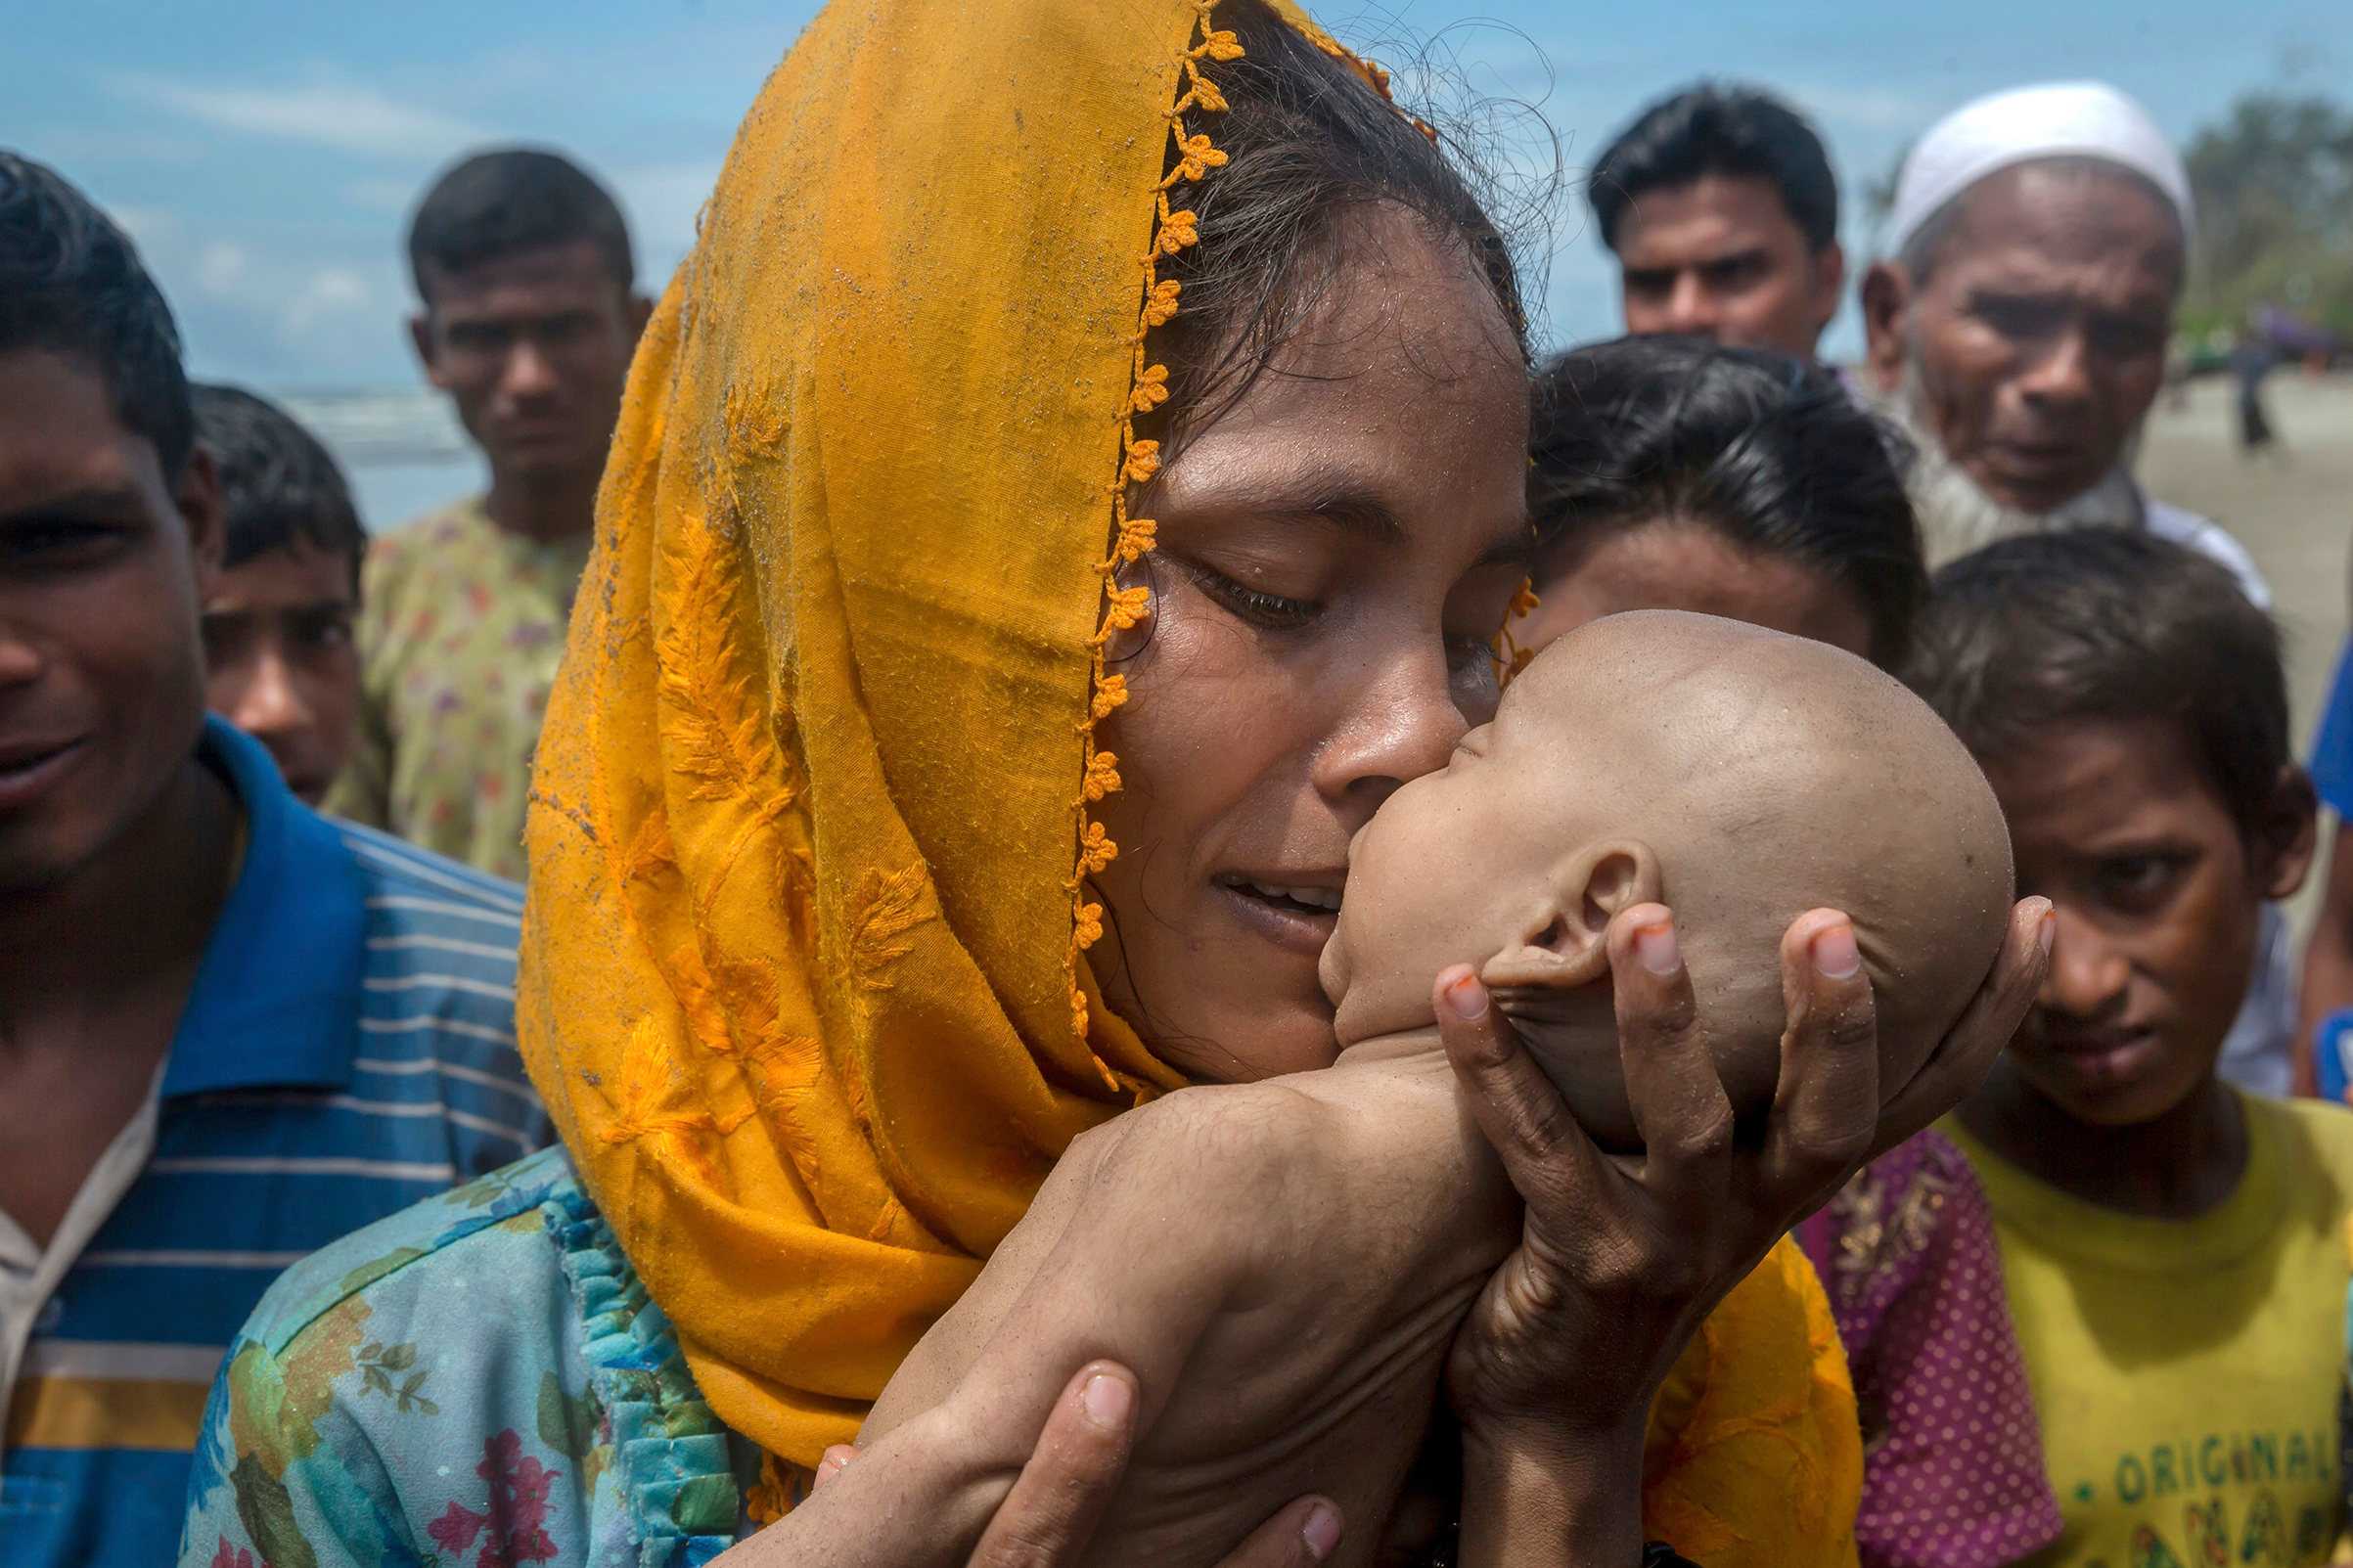 A Rohingya woman grieves for her infant son, who died when their boat capsized off Bangladesh on Sept. 14. (Dar Yasin—AP)